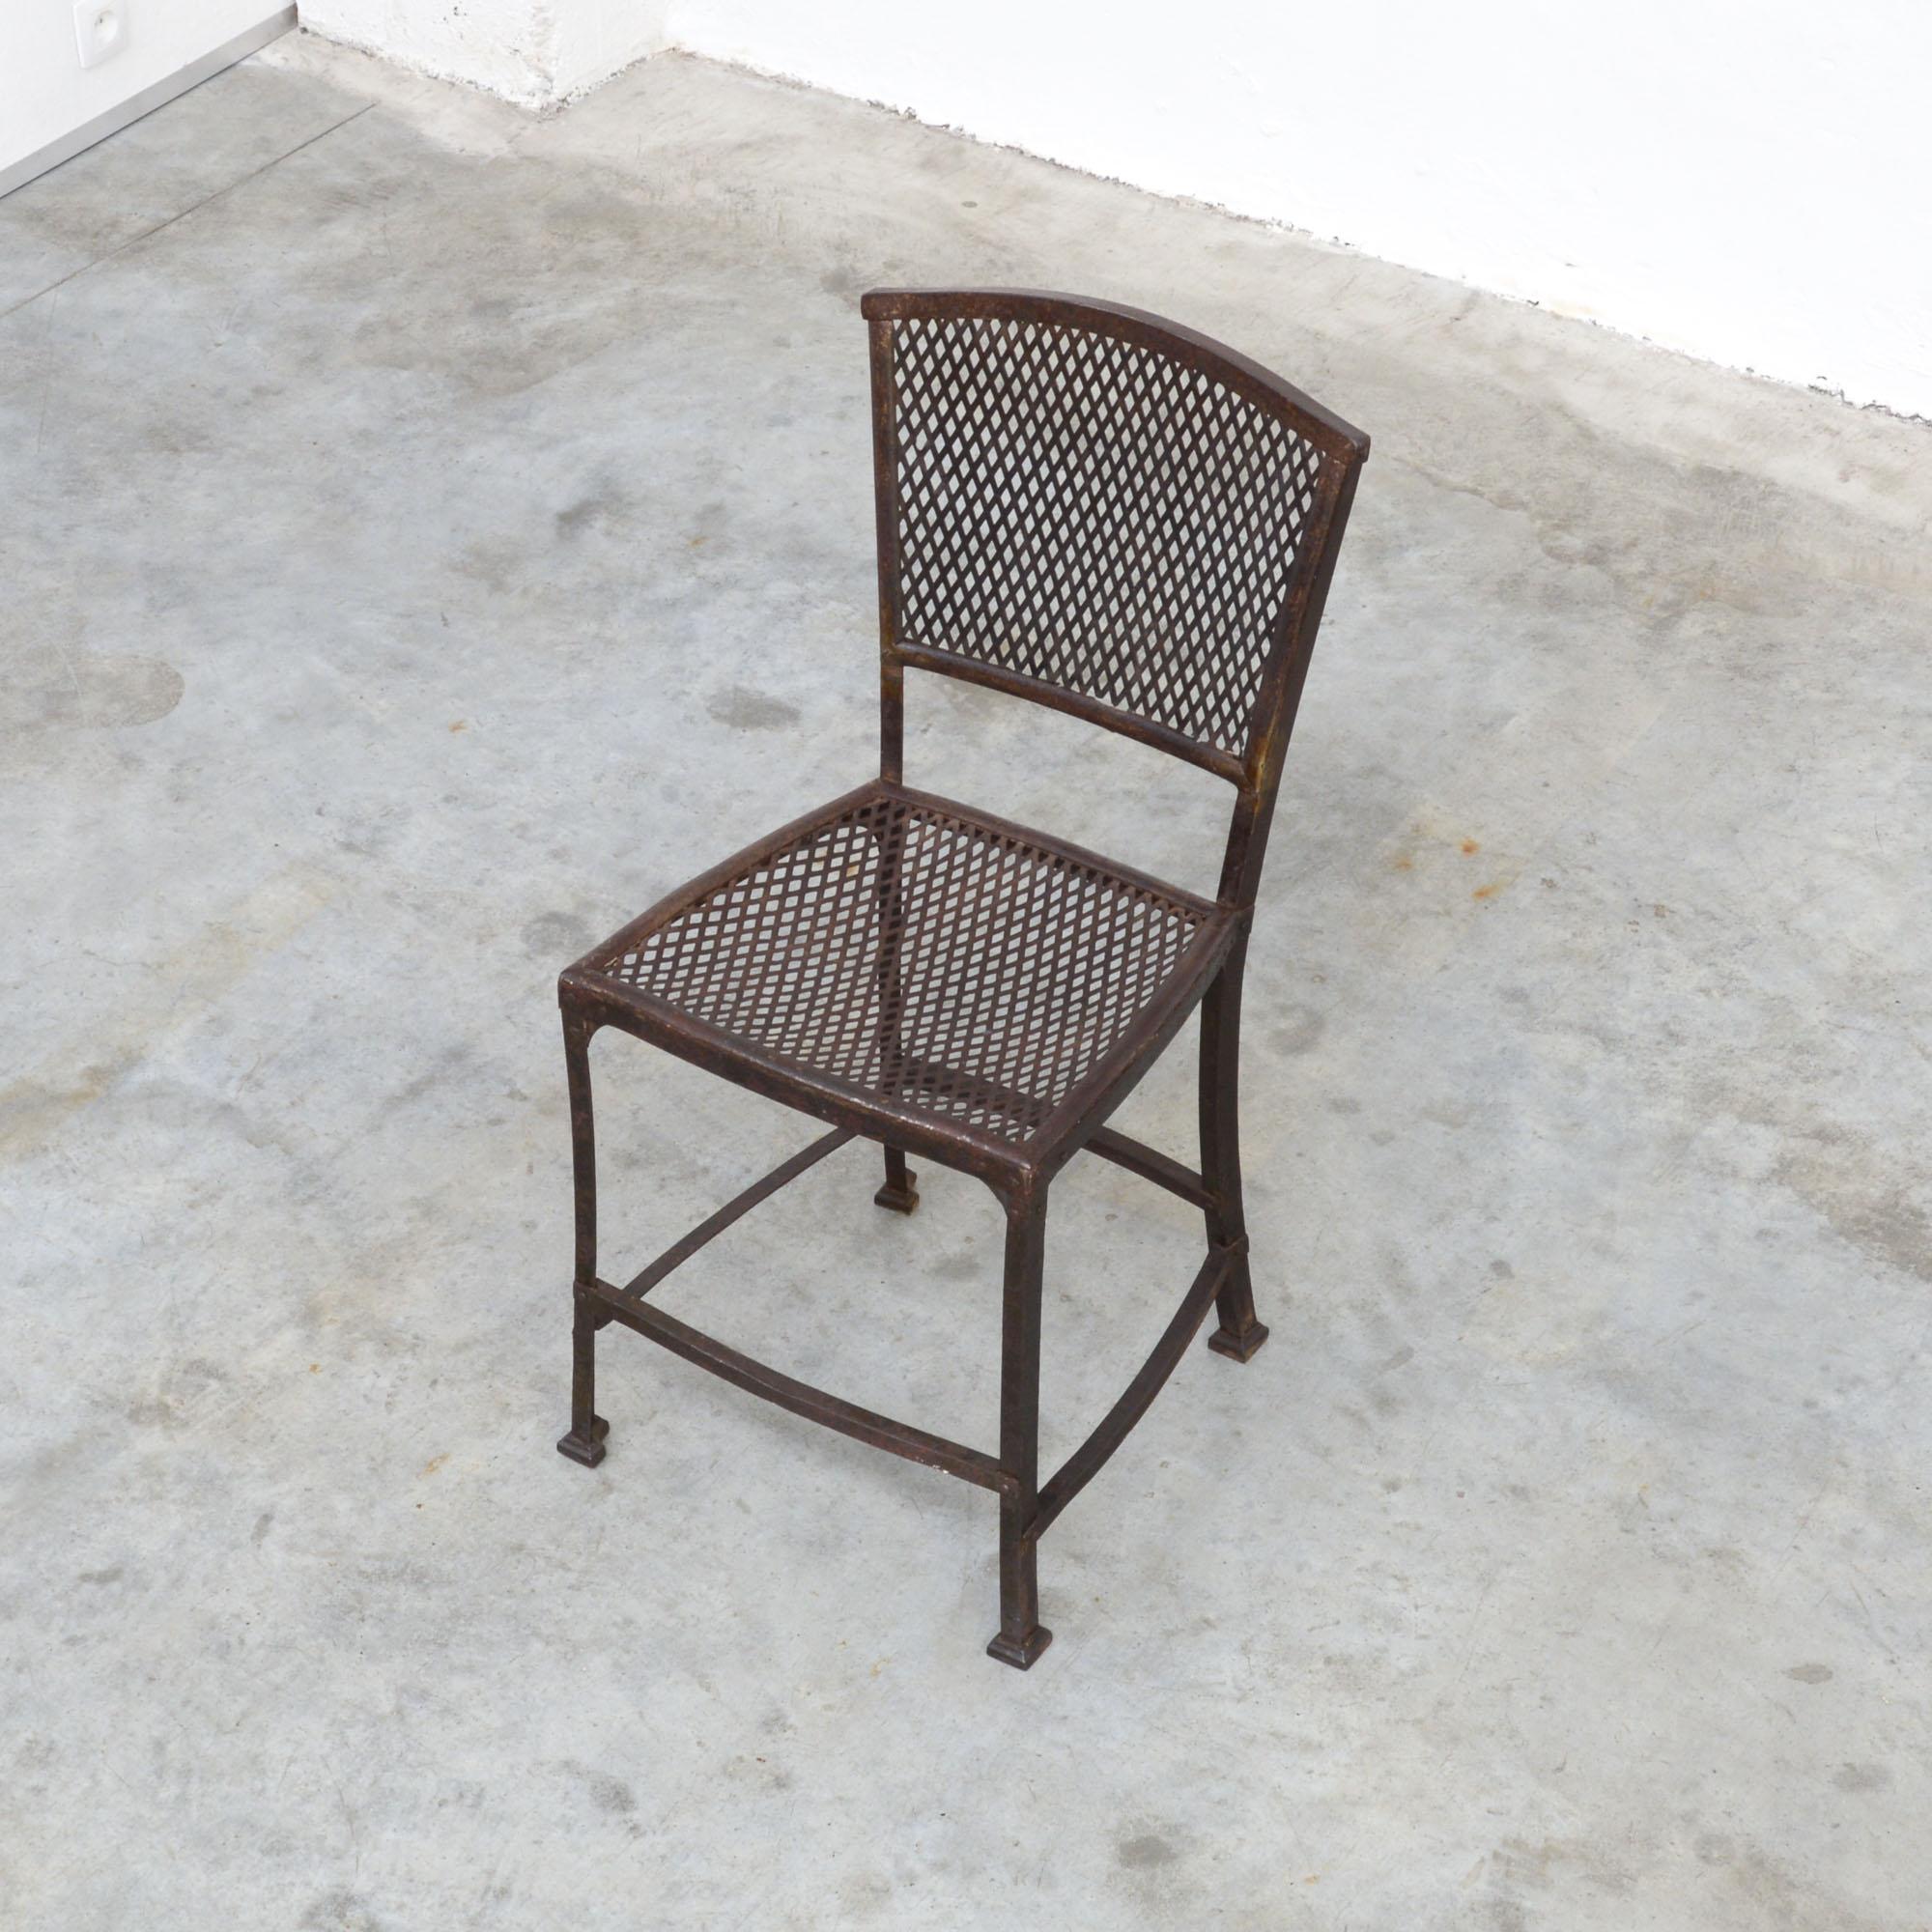 This iron garden chair was designed by the Belgian architect and furniture designer Gustave Serrurier-Bovy for Serrurier et Cie in 1903. This chair is the only ‘garden furniture’ or ‘metal furniture’ mentioned in early advertisements found to date.